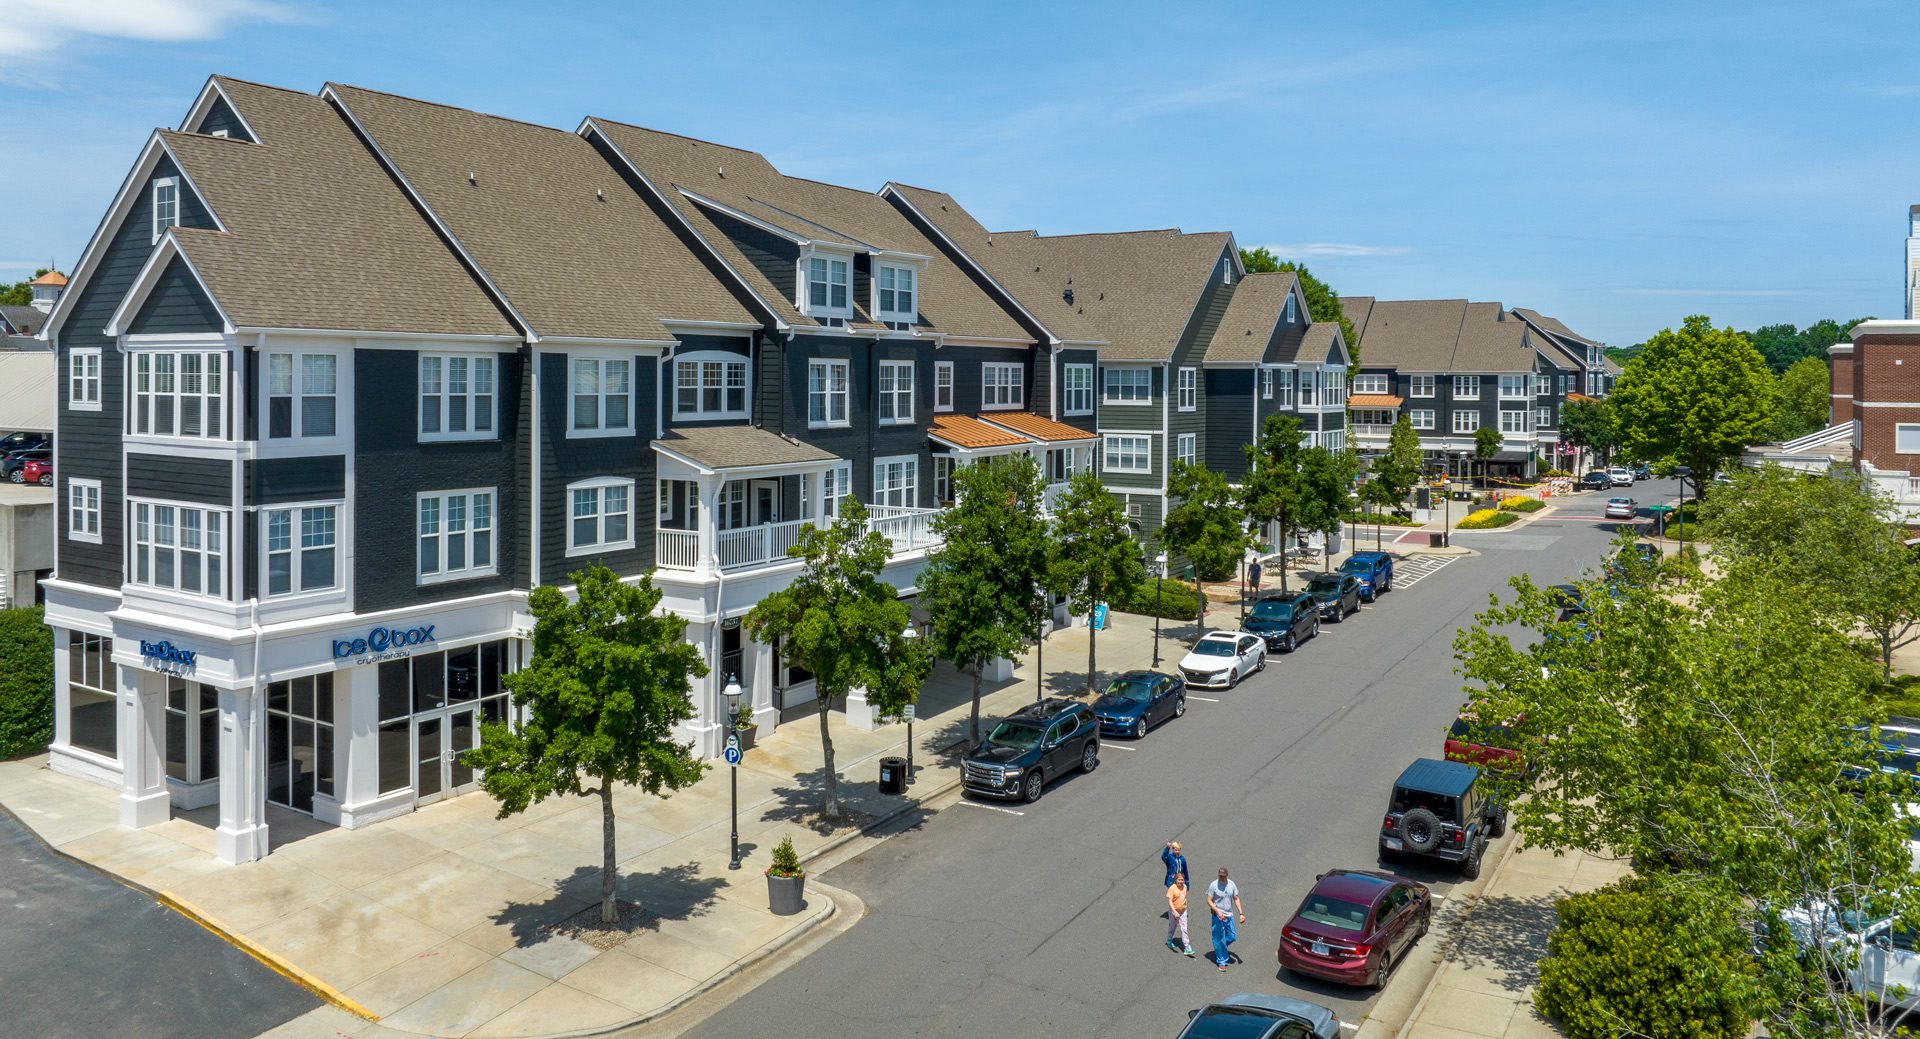 Ballantyne Village shops and residential